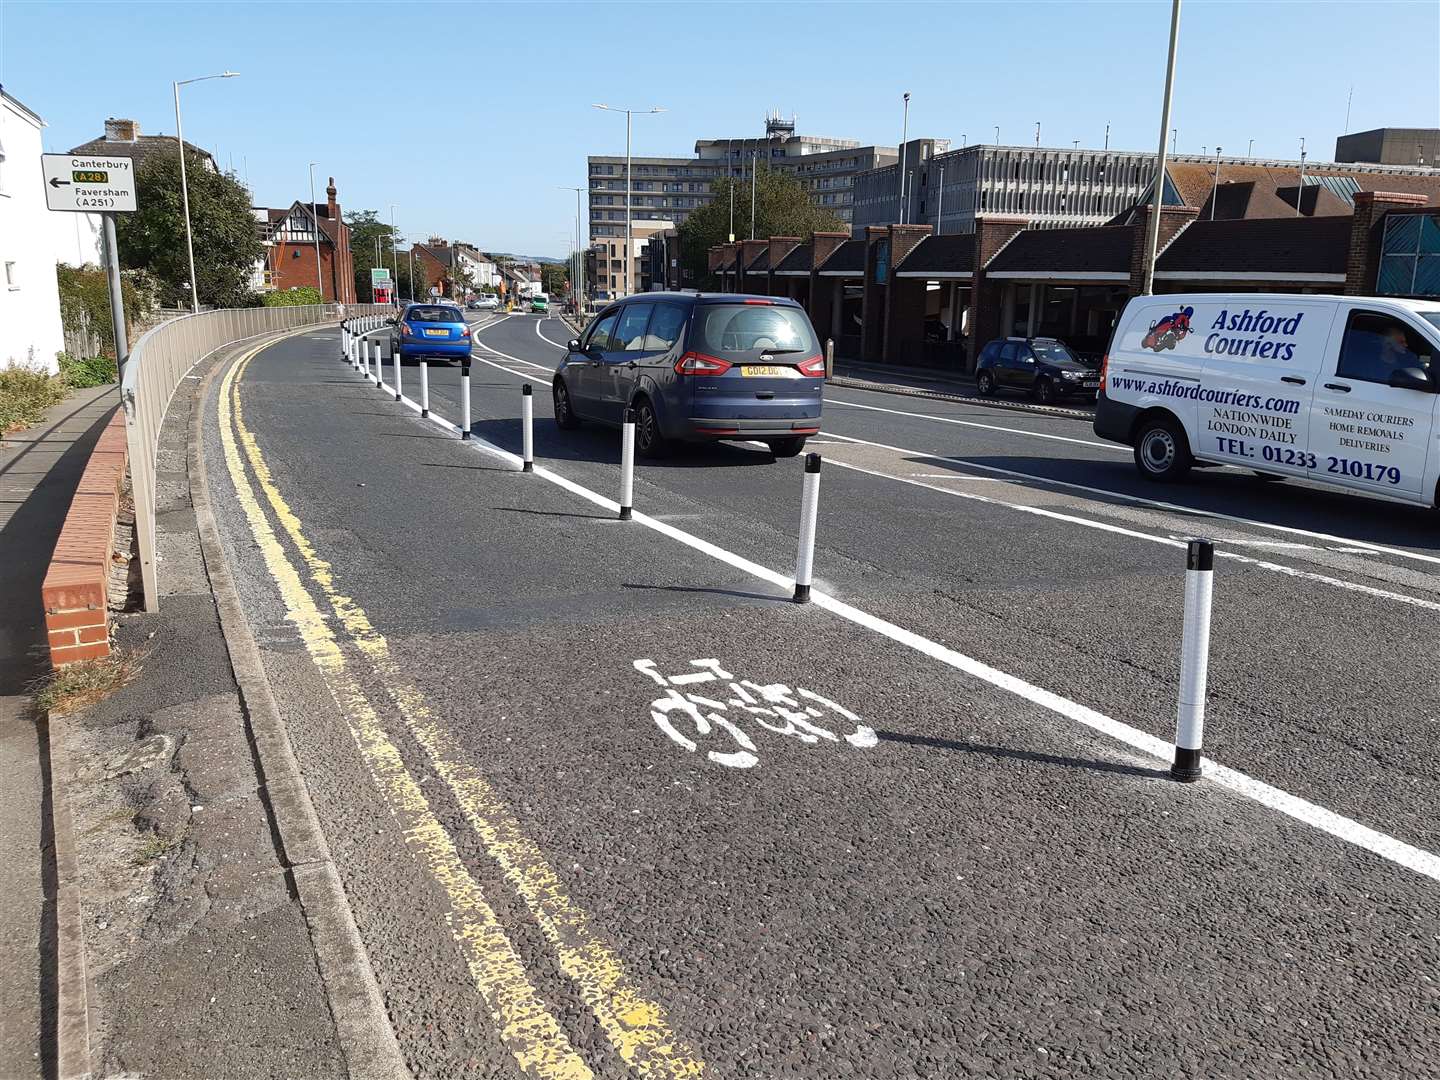 The pop-up cycle lane in Ashford before it was removed